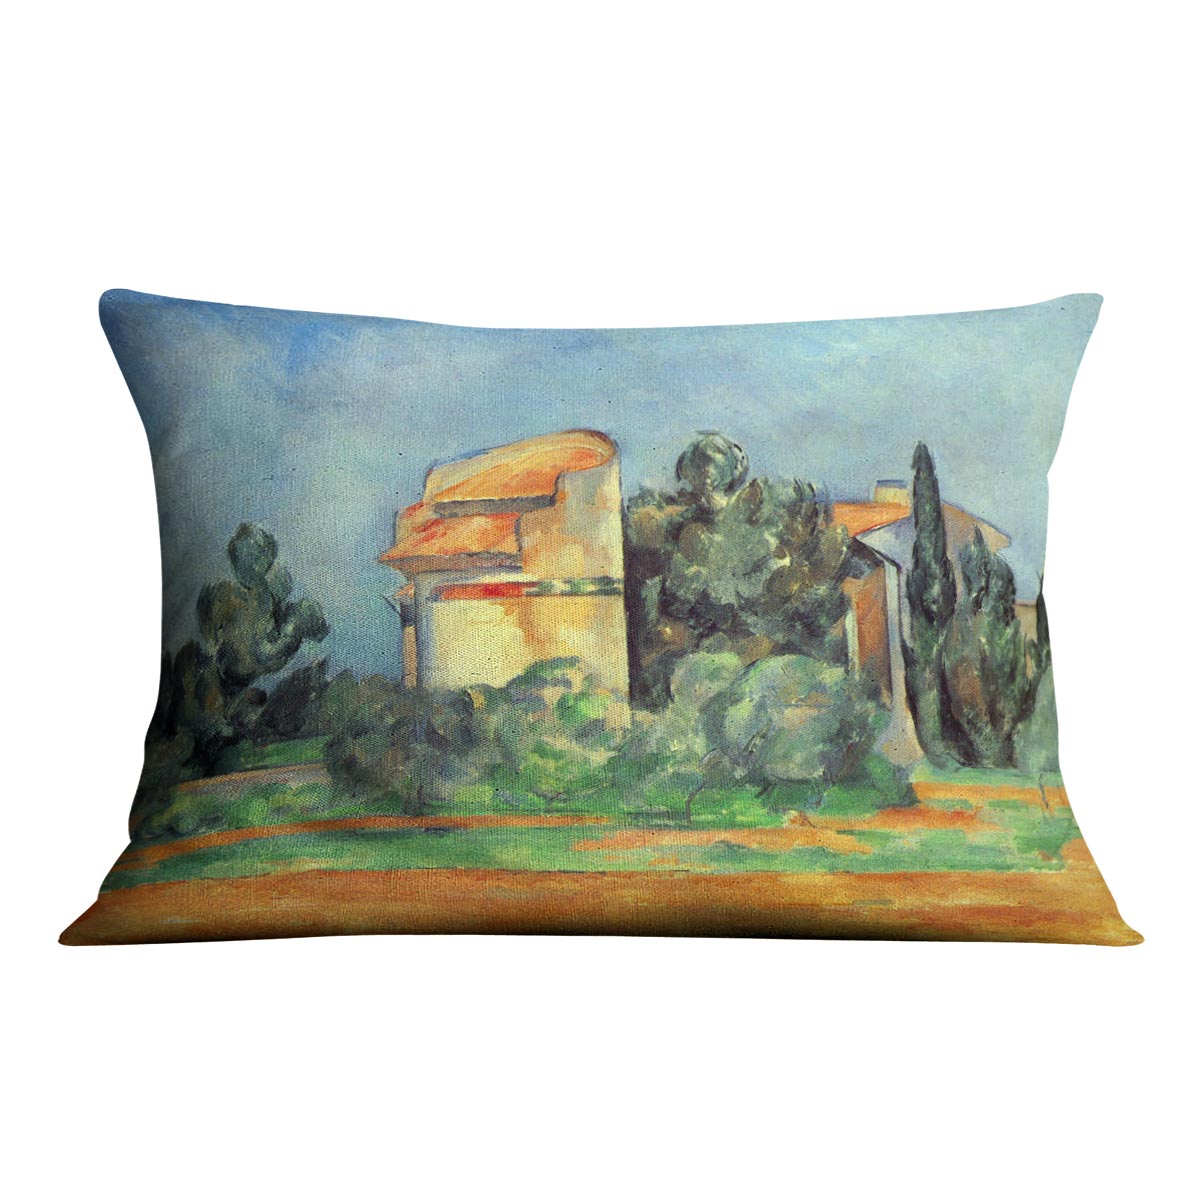 Pigeonry in Bellvue by Cezanne Cushion - Canvas Art Rocks - 4